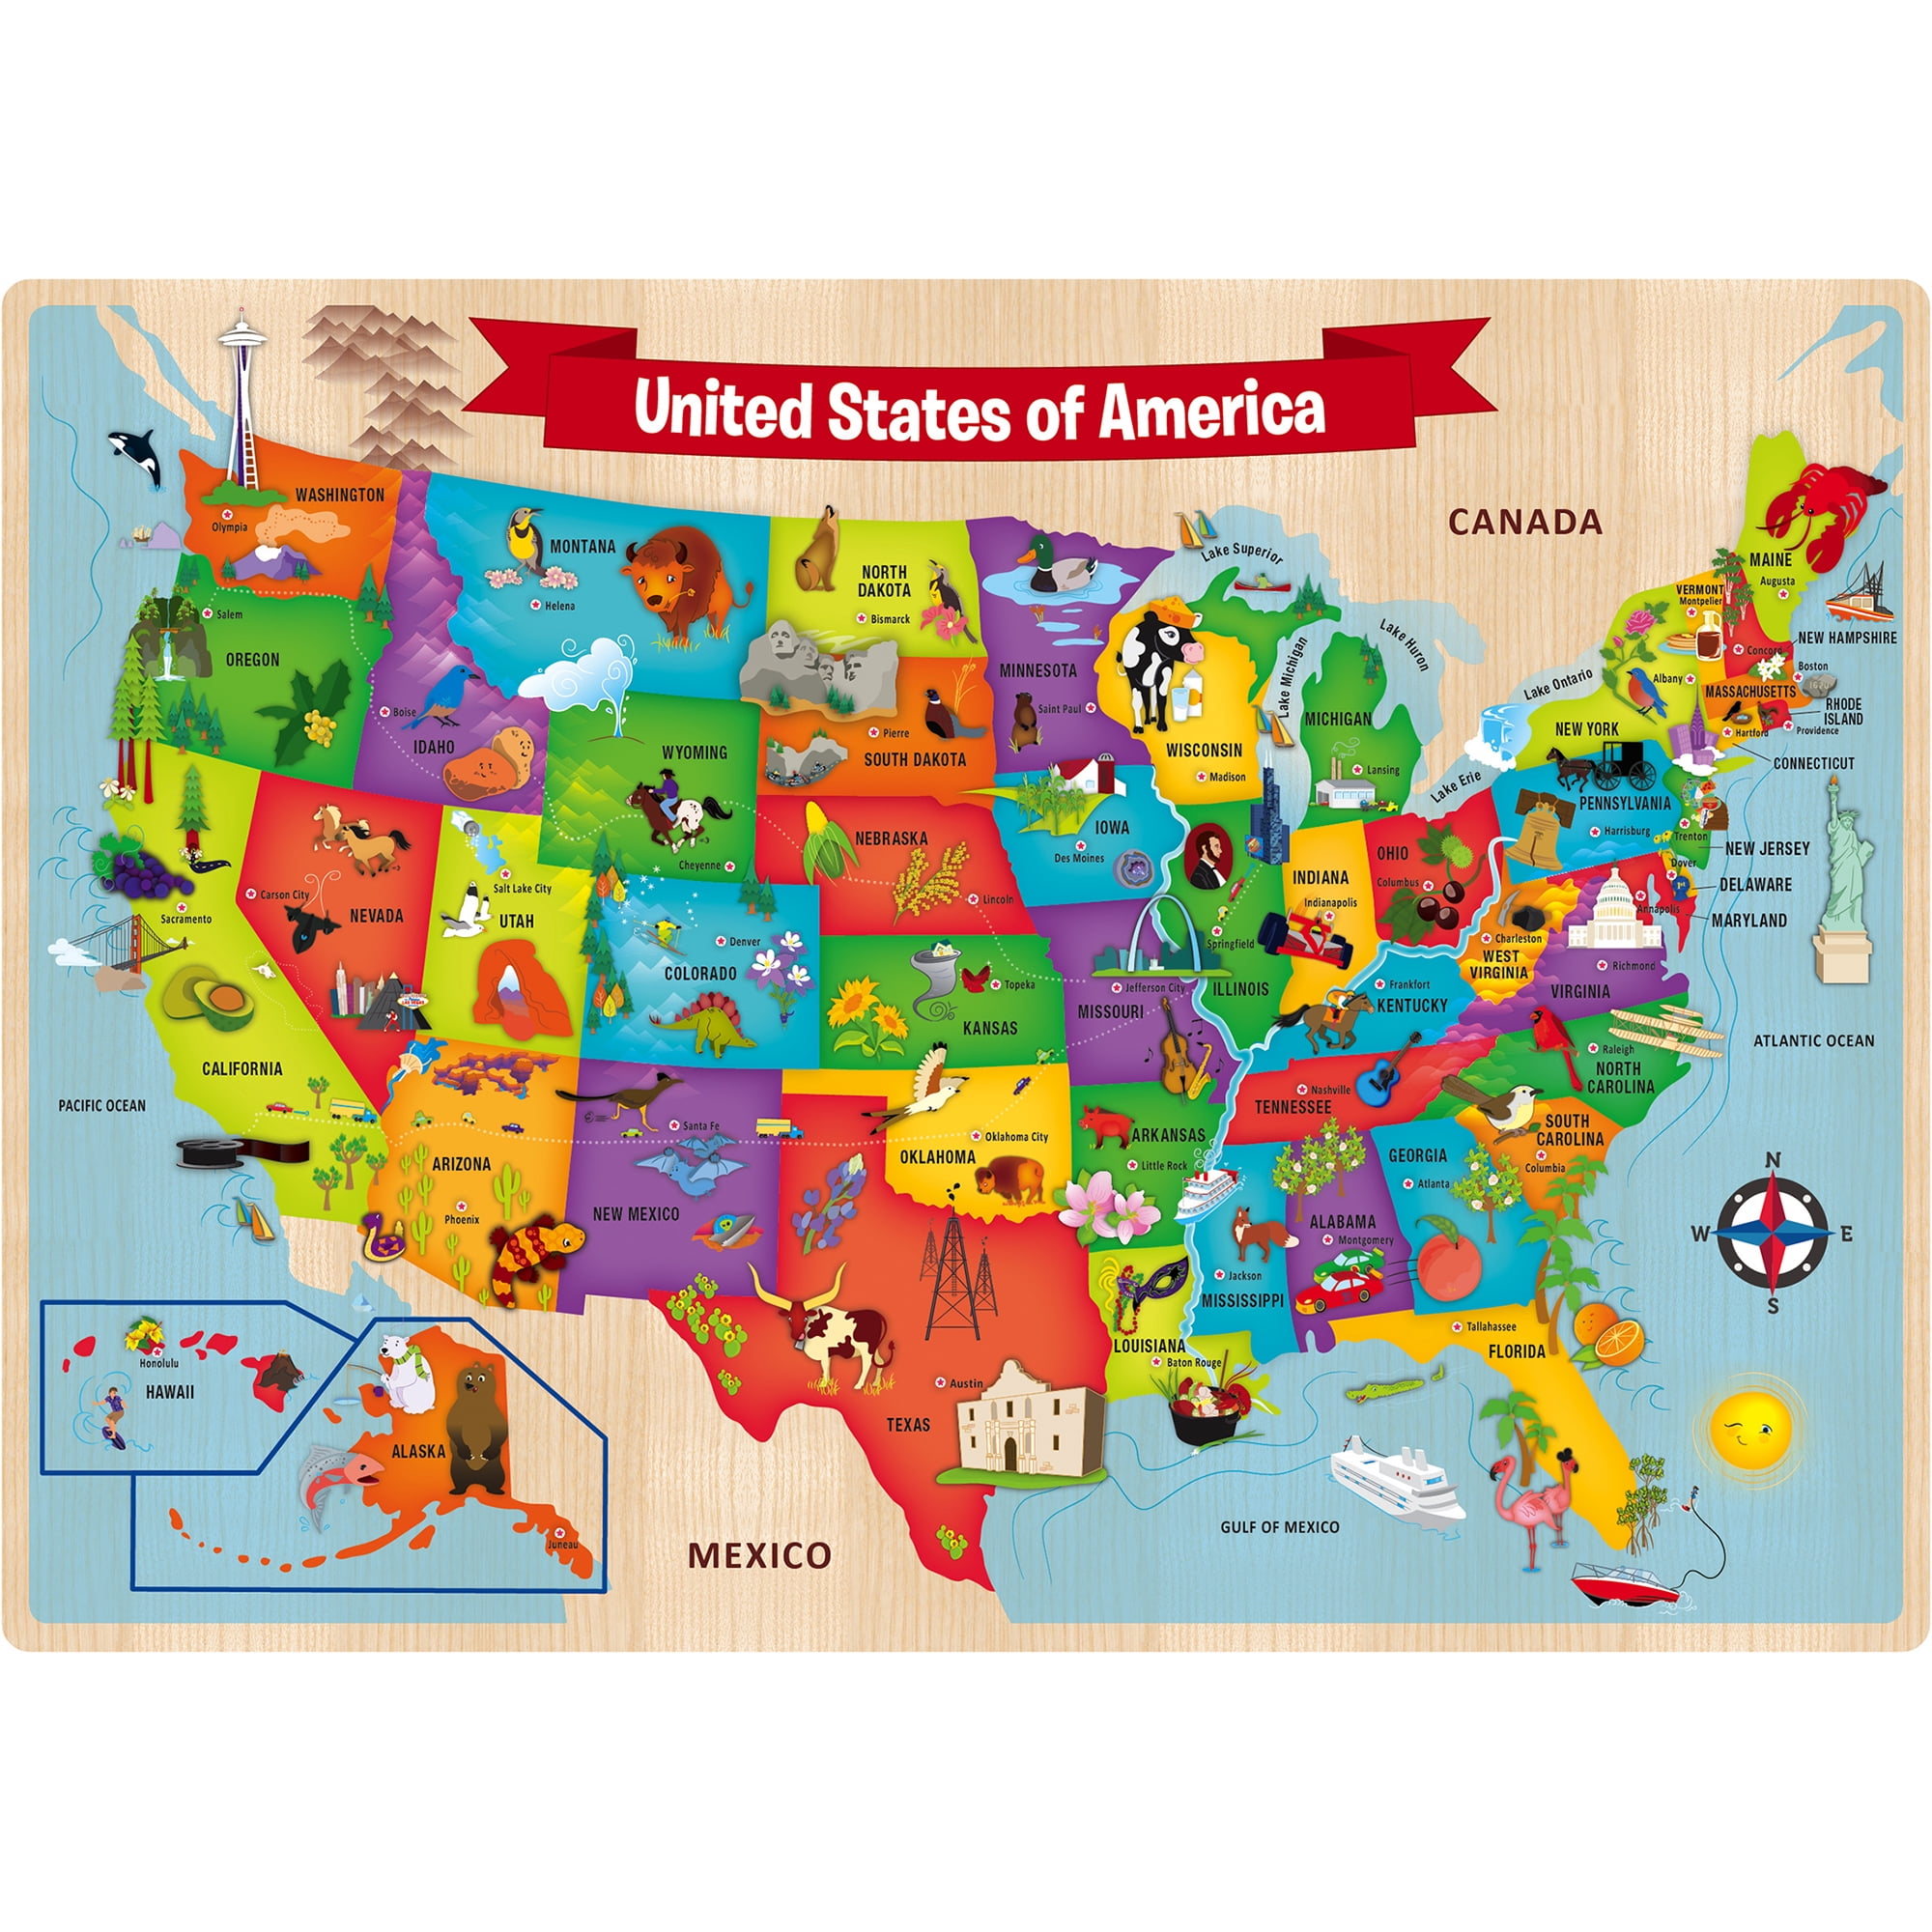 Professor Poplar's Fifty Nifty United States USA Map Wooden Jigsaw Puzzle 